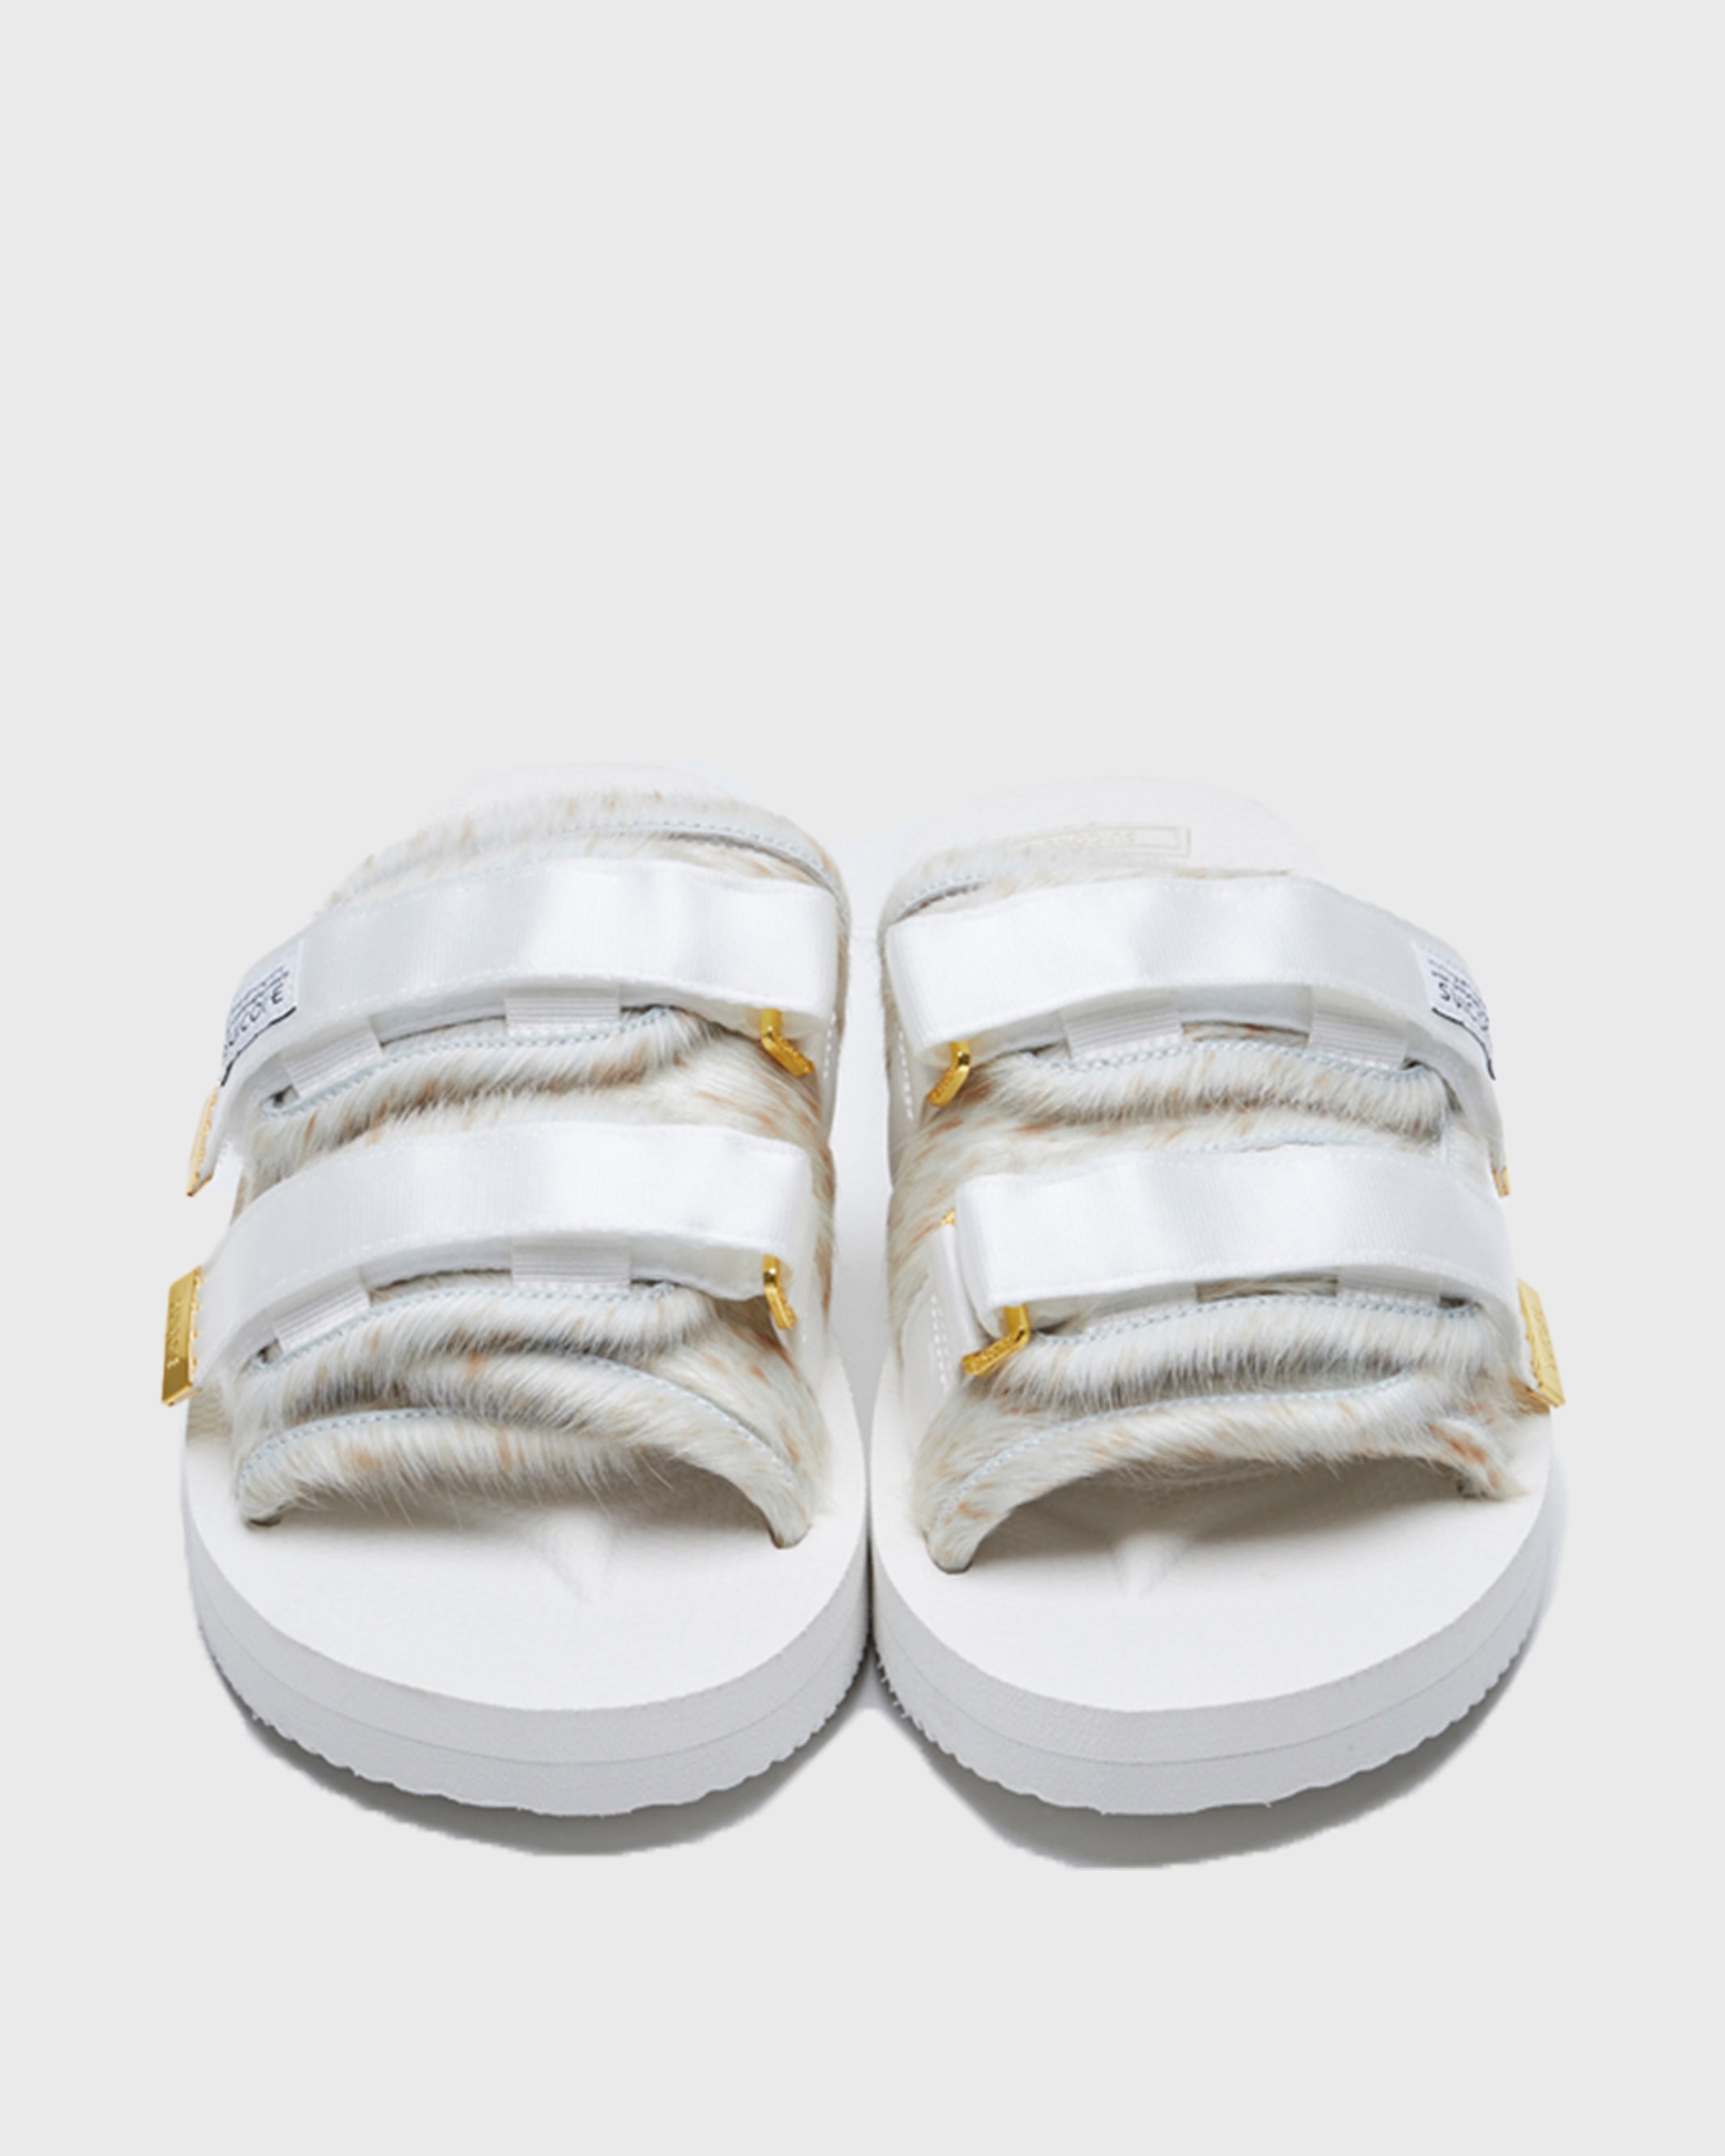 SUICOKE MOTO-Vhl in White Mix F-OG-056VHL | Shop from eightywingold an official brand partner for SUICOKE Canada and US.